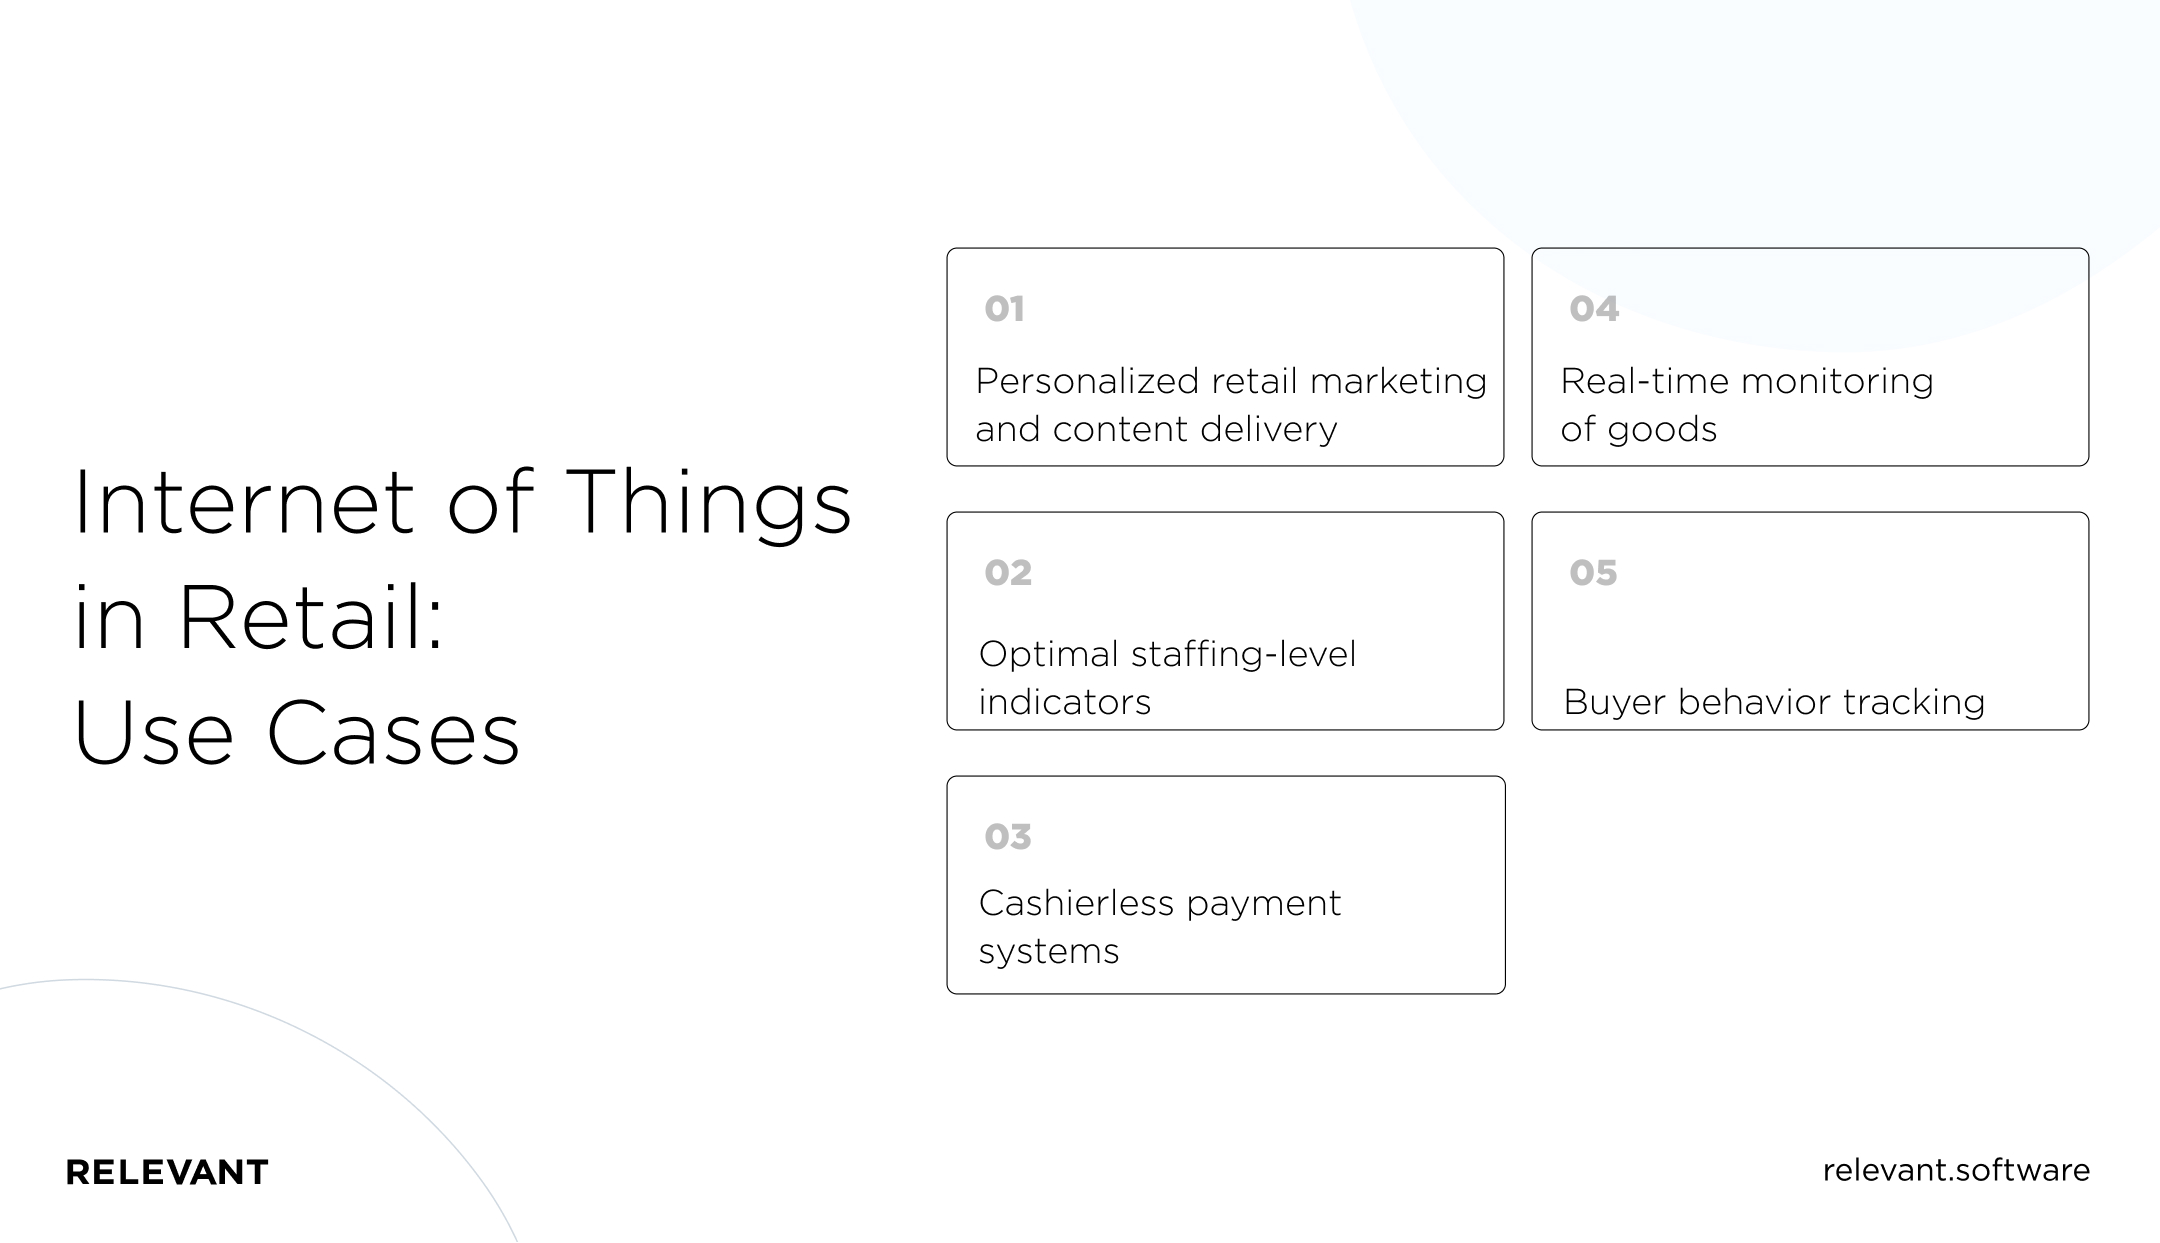 Internet of Things in Retail: Use Cases